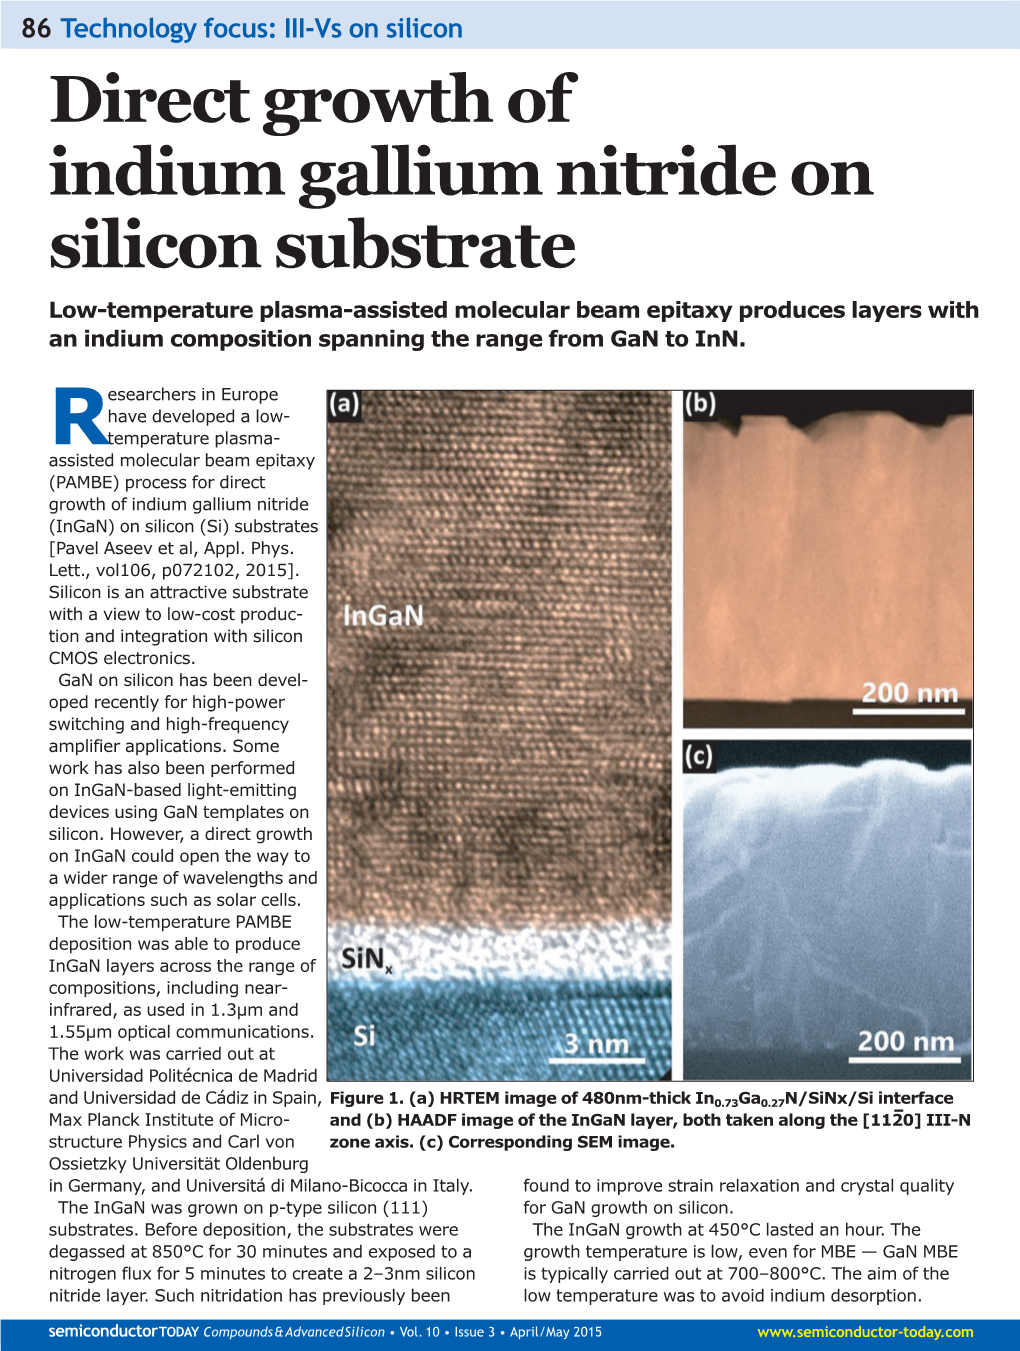 Direct Growth of Indium Gallium Nitride on Silicon Substrate